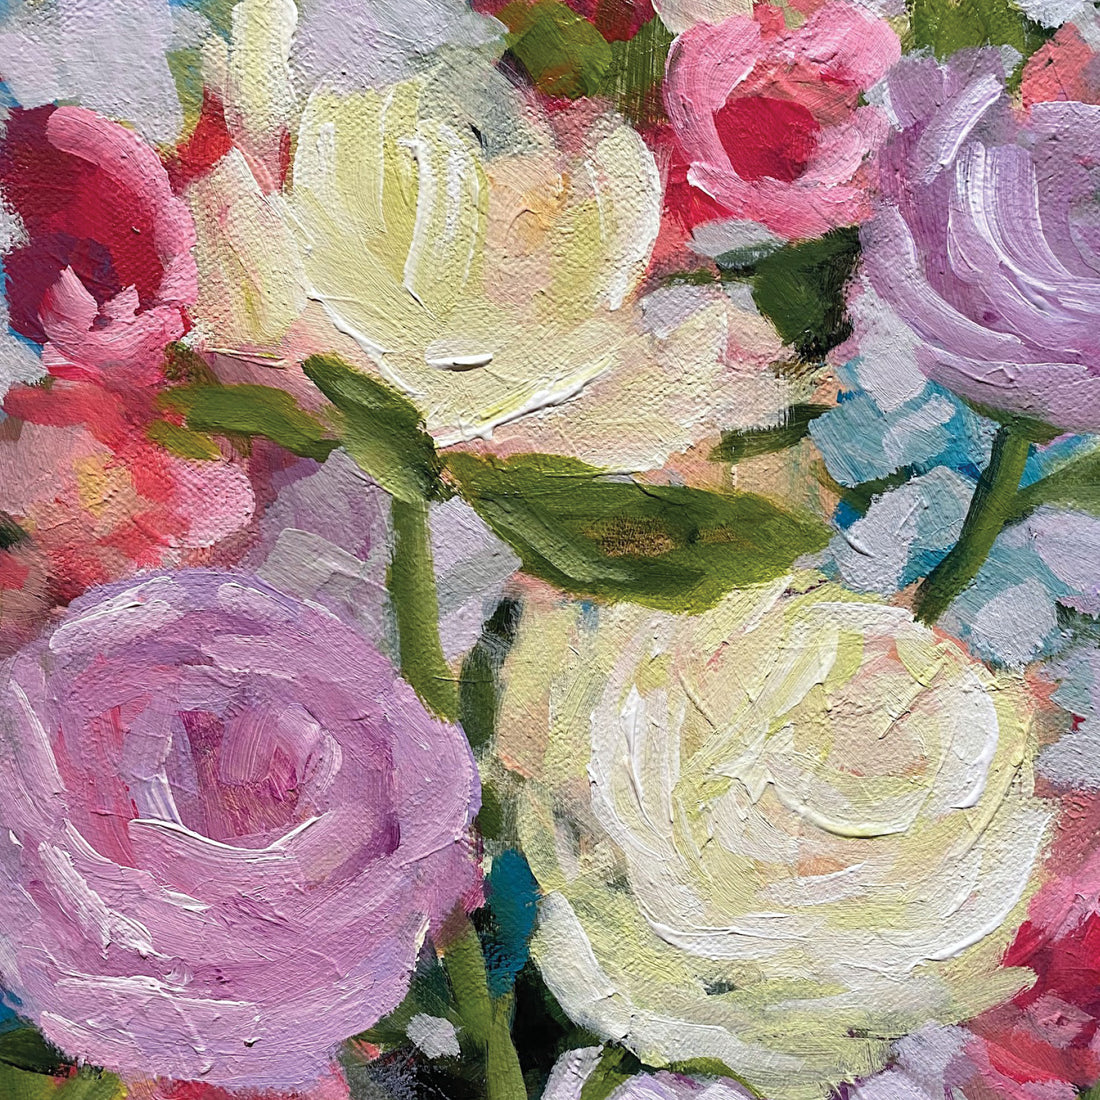 Raquel Roth "Here Comes Spring" abstract floral painting Canadian artist Kefi Art Gallery